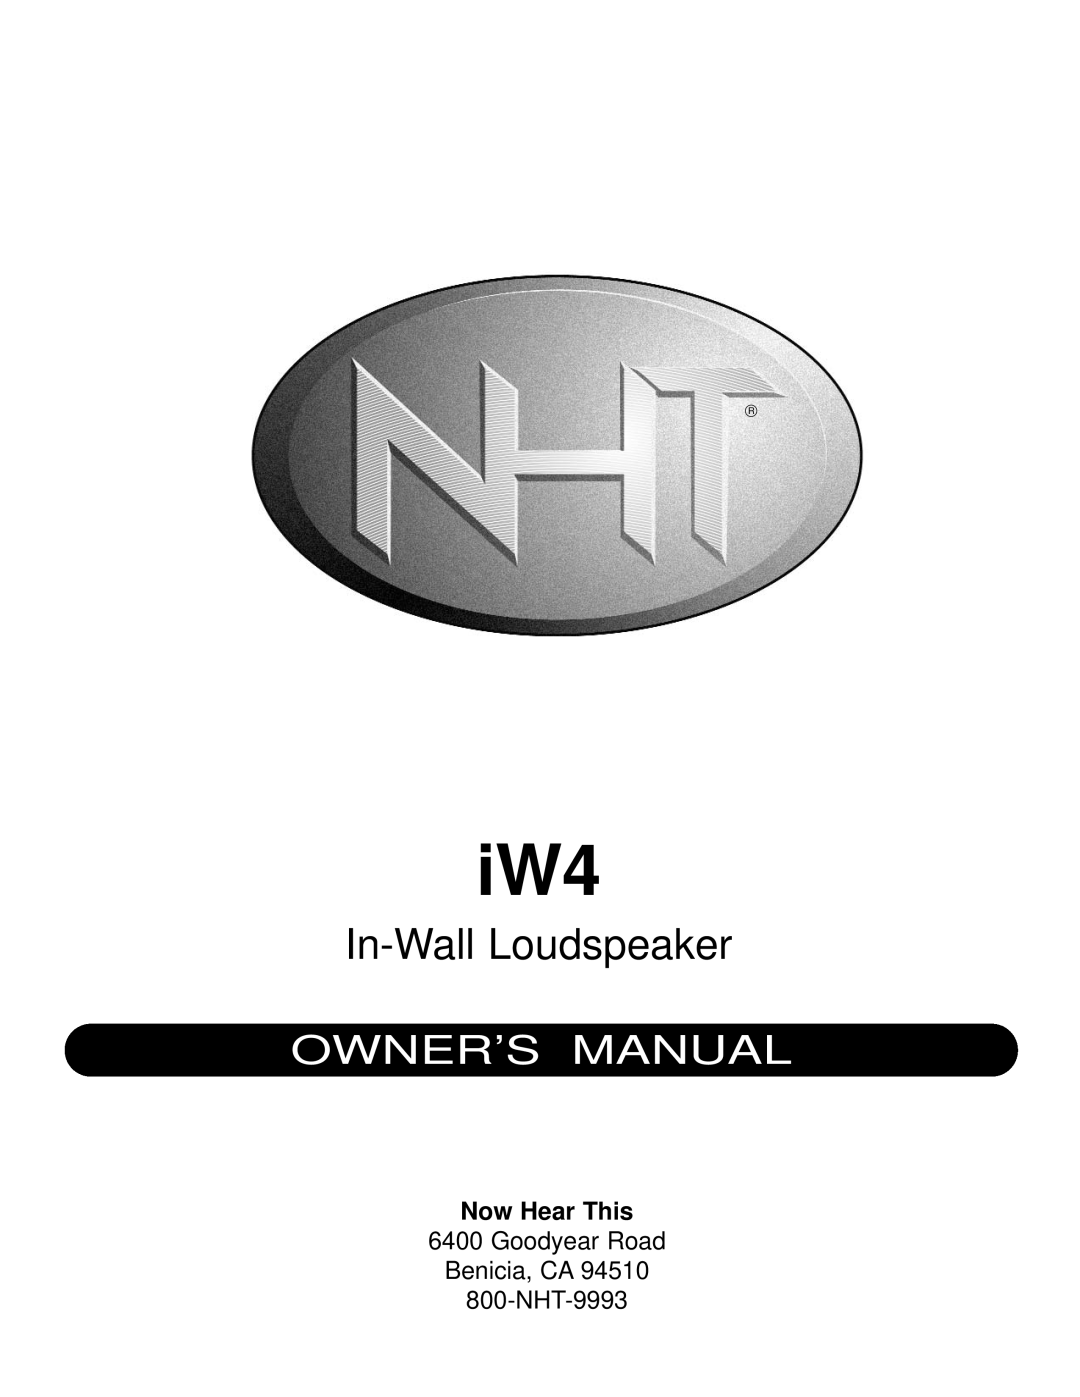 NHT IW4 owner manual In-WallLoudspeaker, Now Hear This, Goodyear Road Benicia, CA 800-NHT-9993 